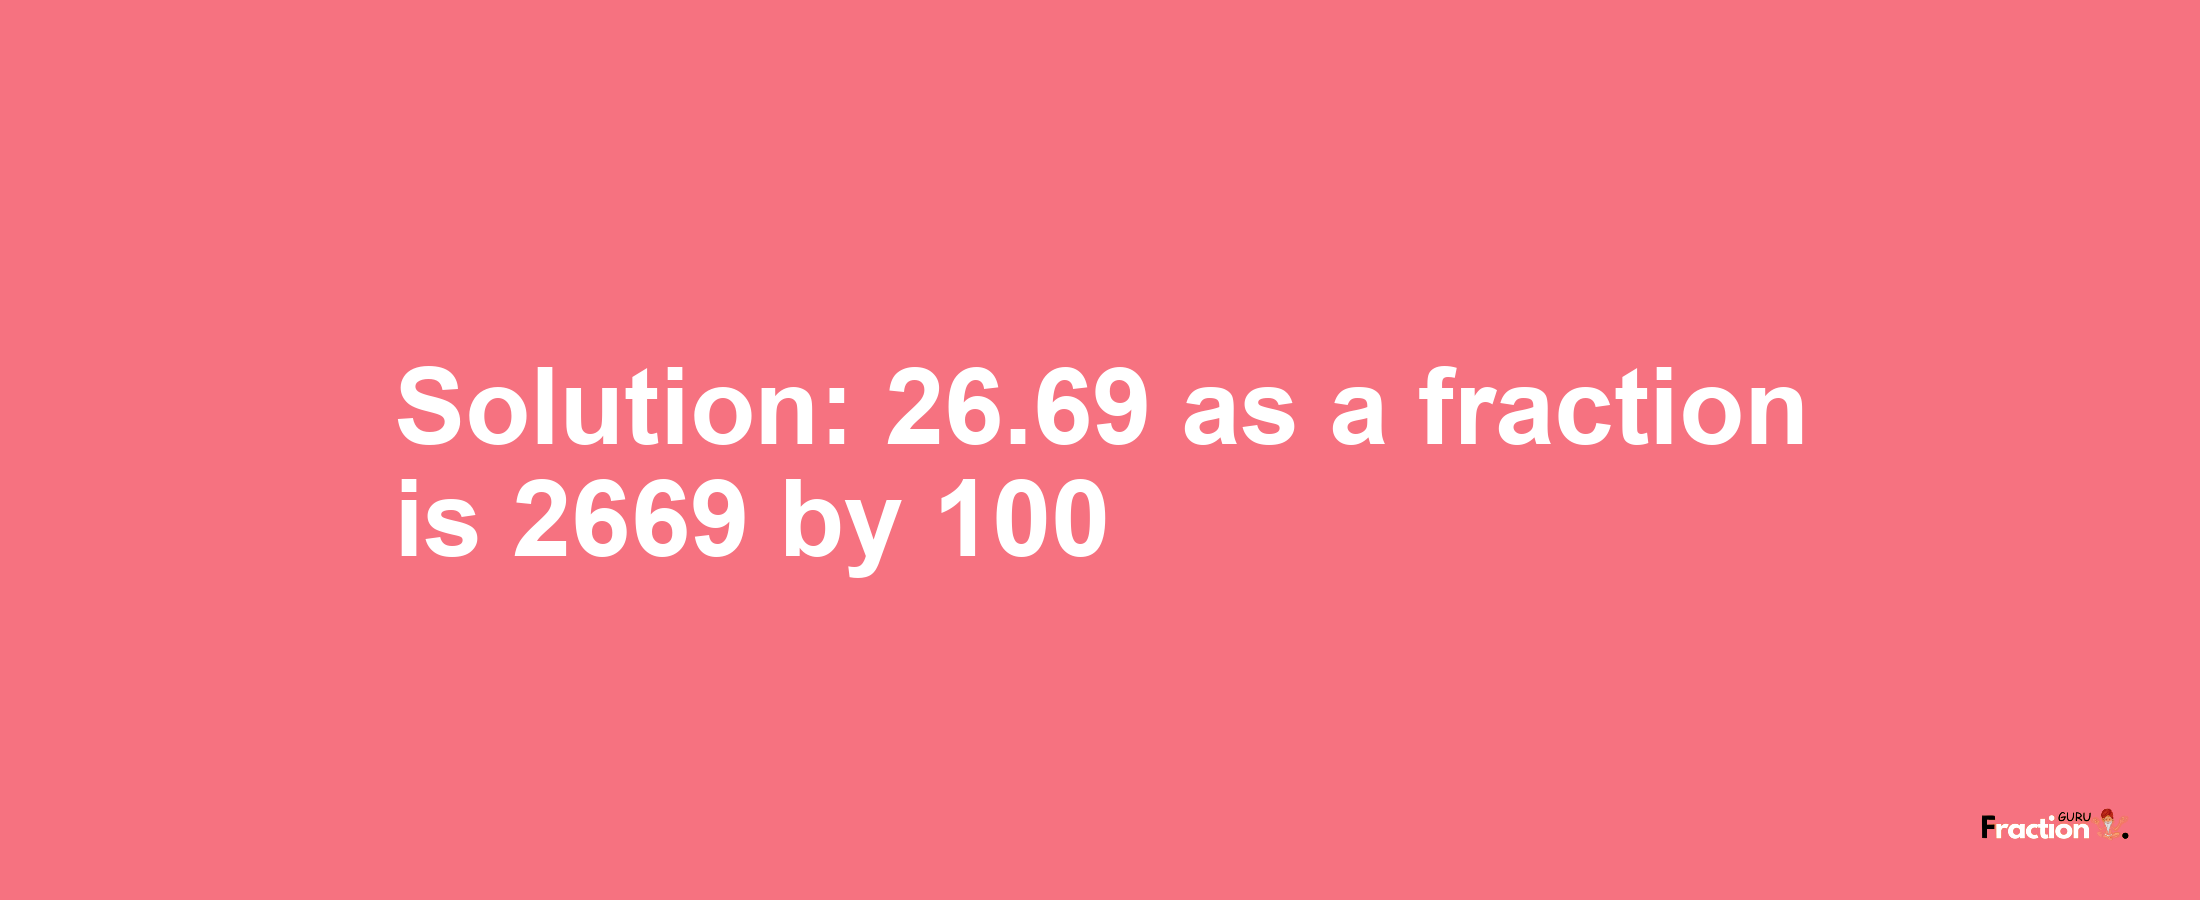 Solution:26.69 as a fraction is 2669/100